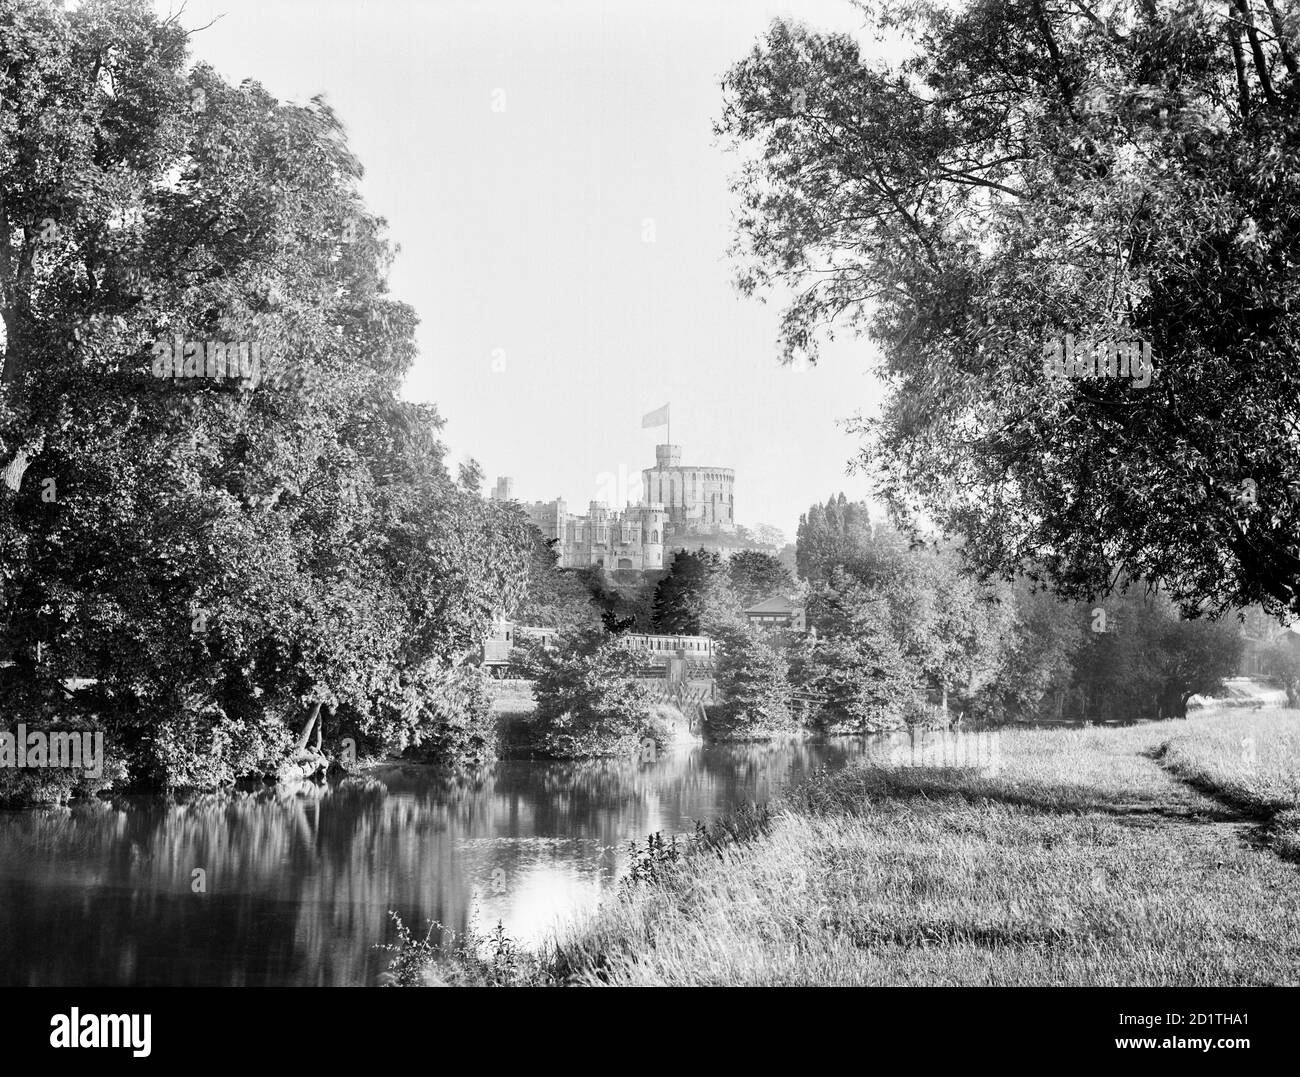 WINDSOR CASTLE, Berkshire. A view of the castle from above Romney Lock. Although William the Conquerer had a castle on this site, the first stone buildings were put up by Henry II between 1165 and 1179. The raised flag suggests Queen Victoria was in residence at the time. Photographed in 1888 by Henry Taunt. Stock Photo